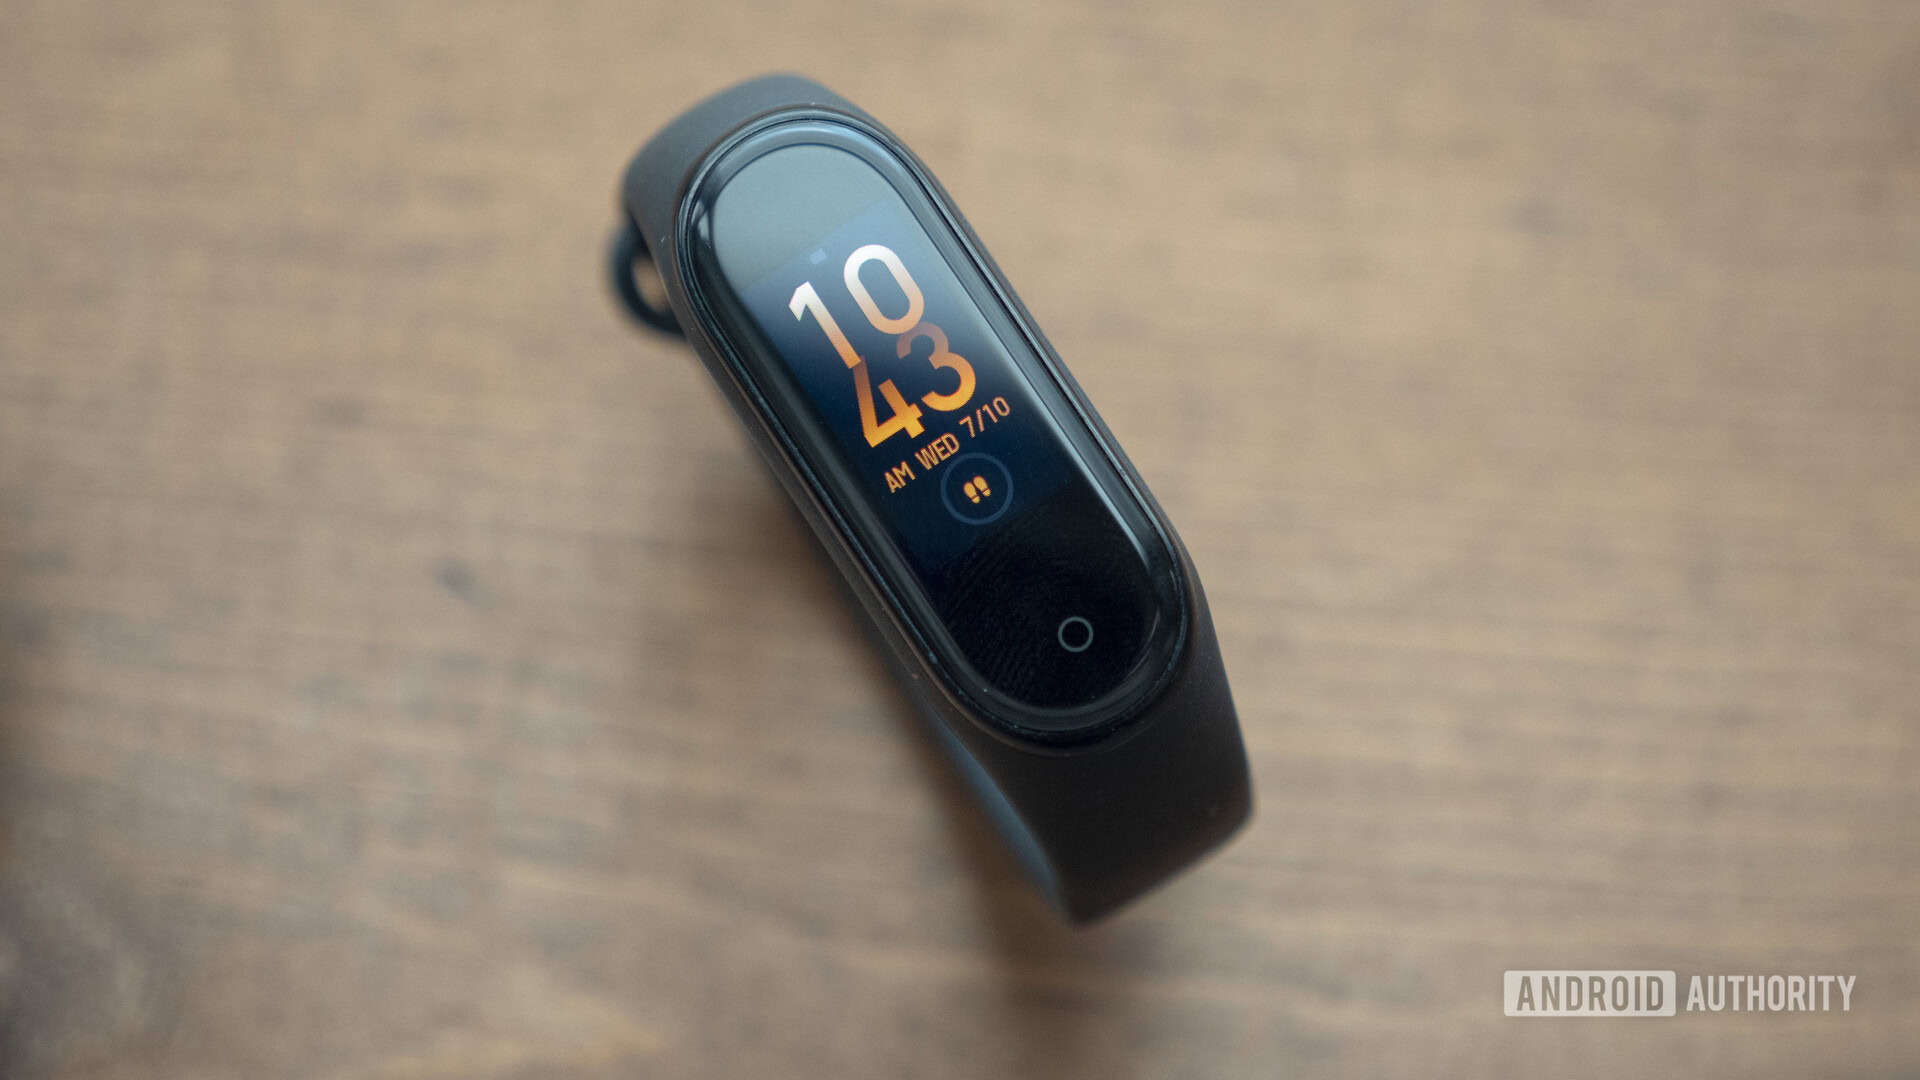 Mi Band 5, new Amazfit device 2020 release confirmed - Android Authority